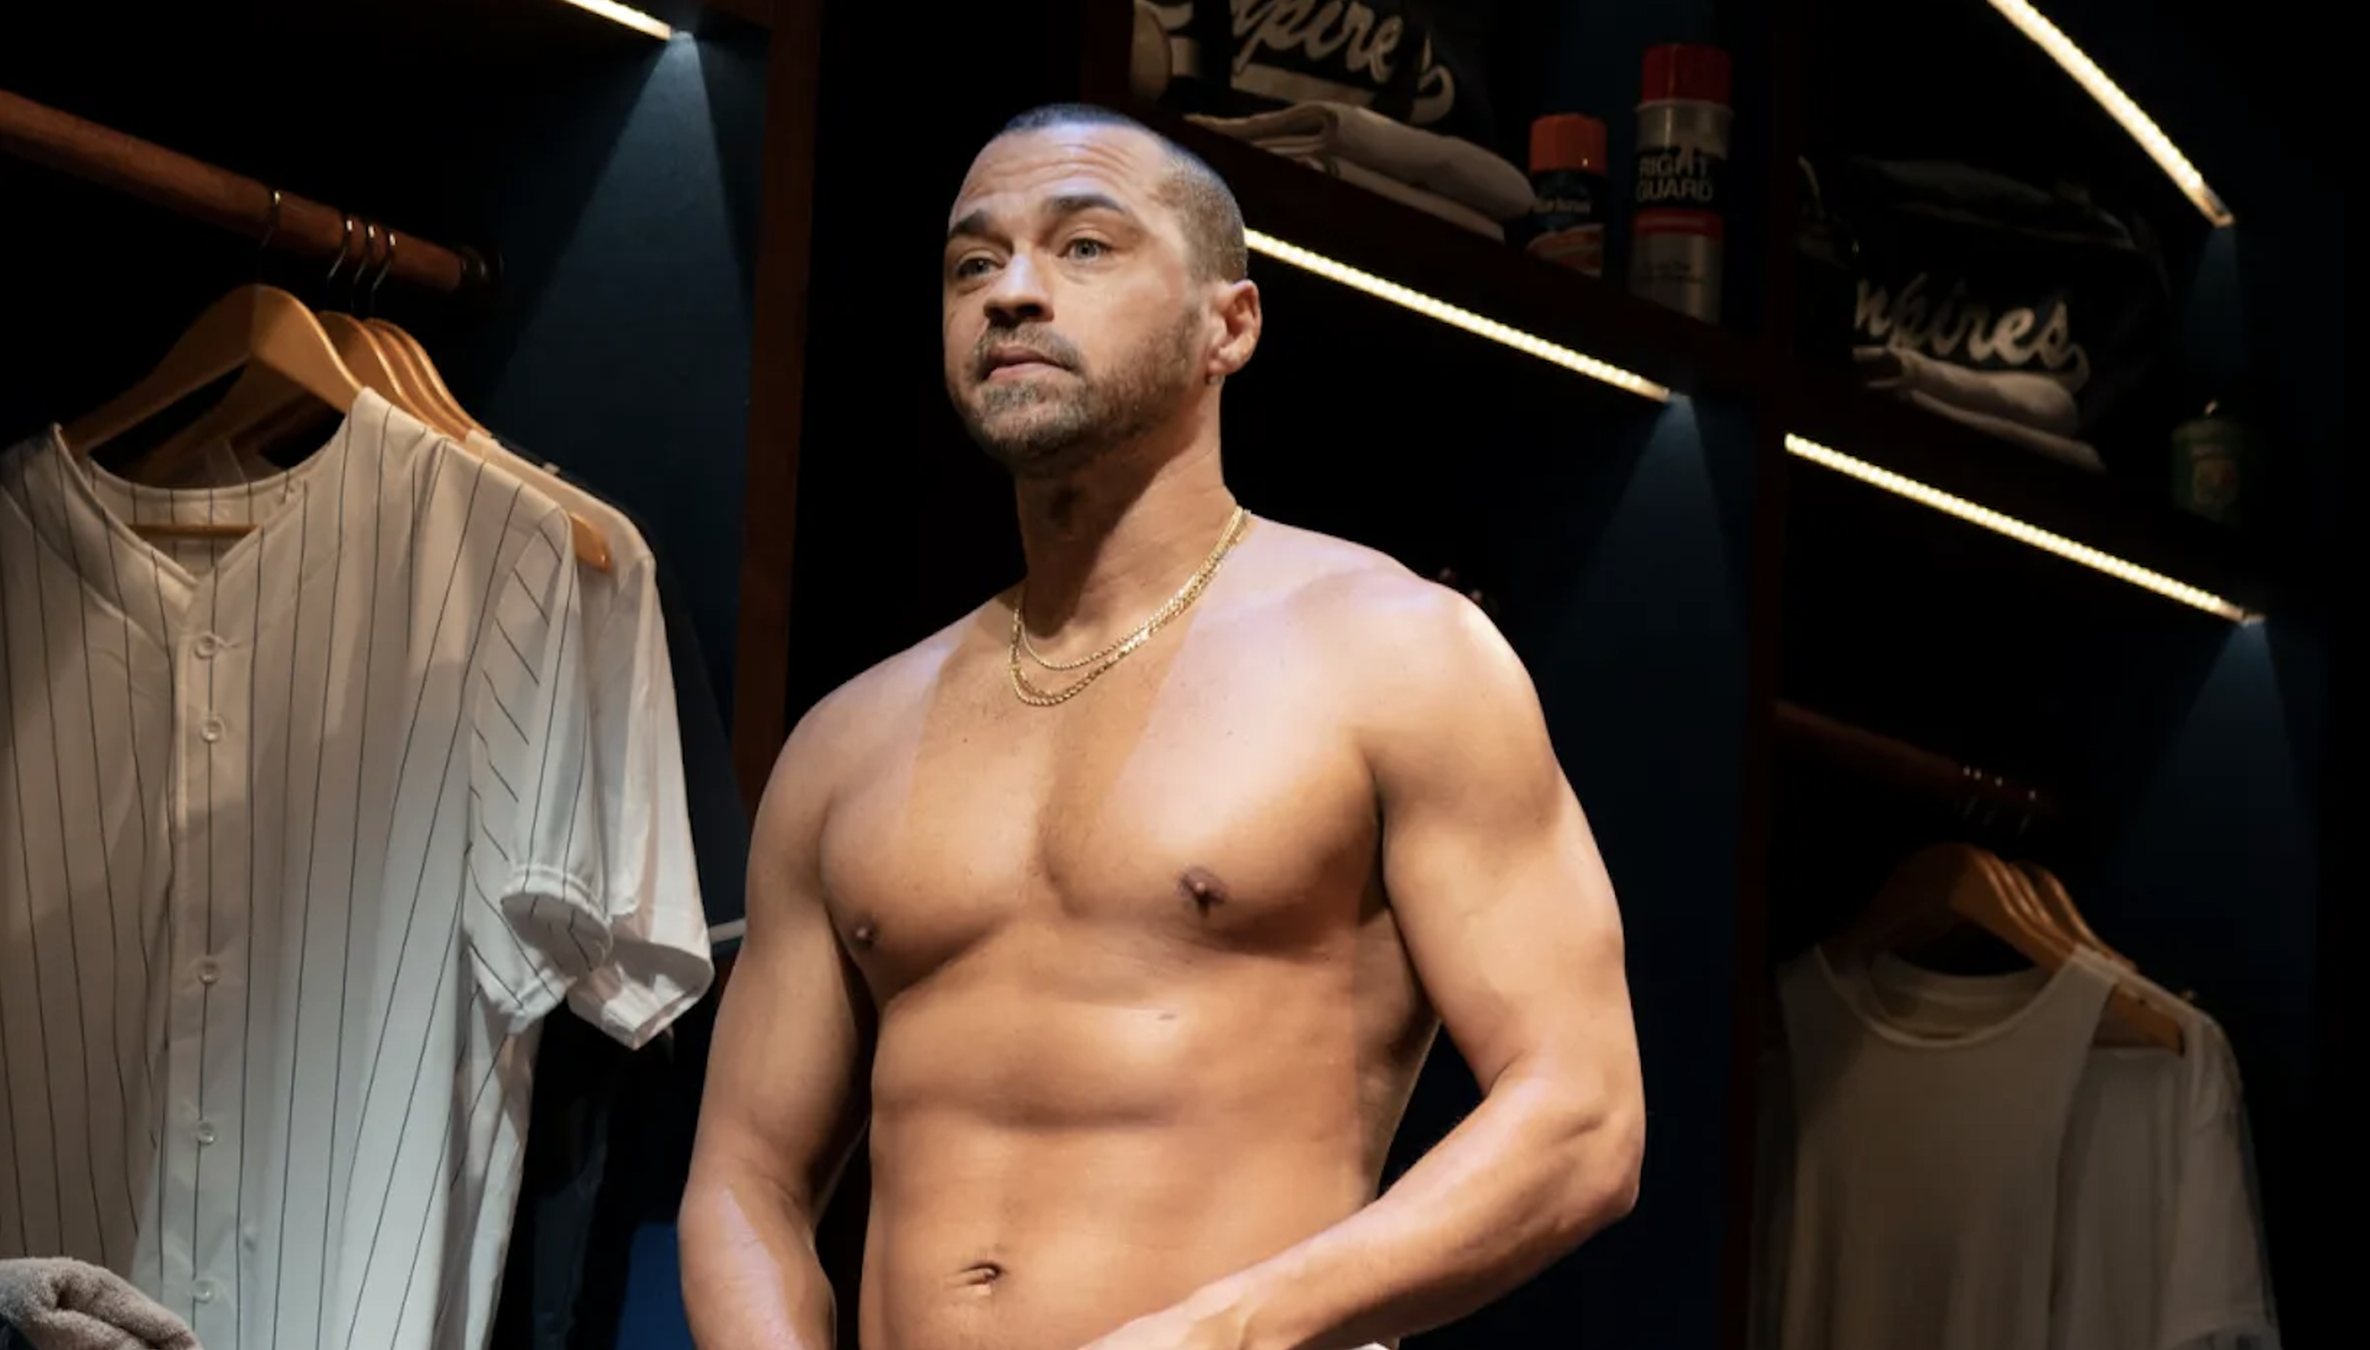 Nudity Onstage What Actors Need to Know Backstage